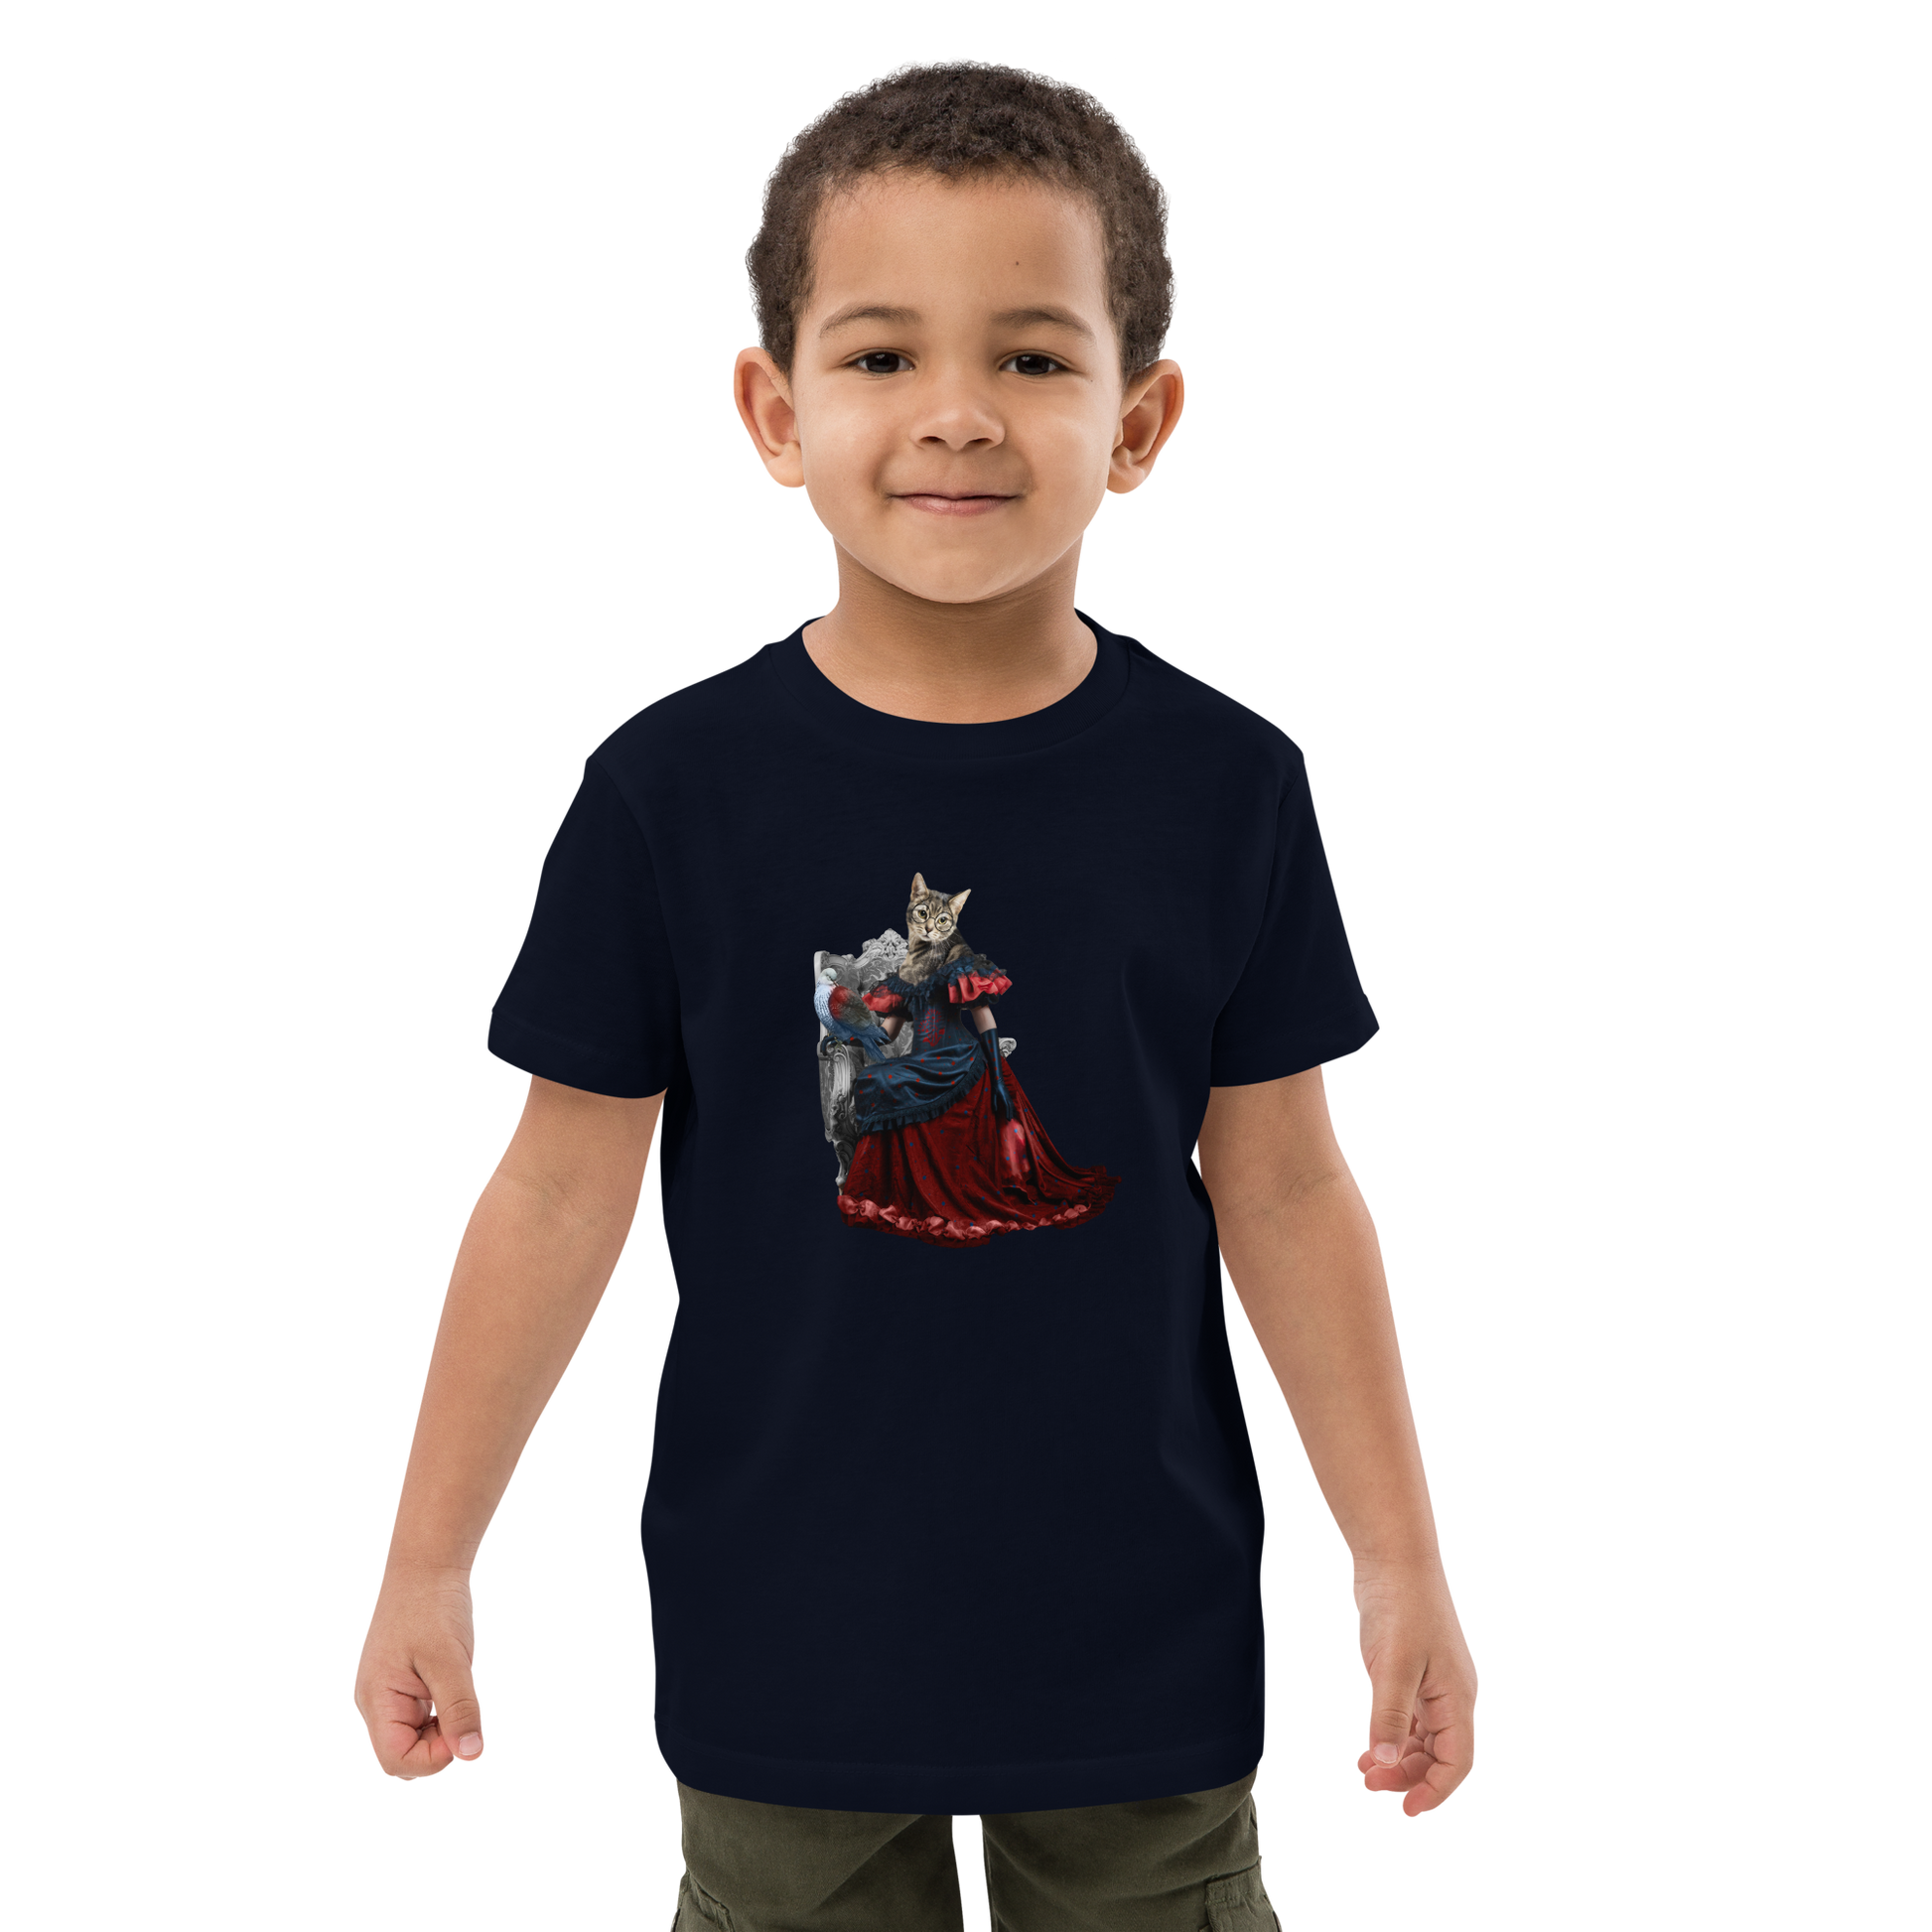 Young boy wearing a French Navy Anthropomorphic Cat Organic Cotton Kids T-Shirt featuring a cute Anthropomorphic Cat graphic on the chest - Kids' Graphic Tees - Funny Animal T-Shirts - Boozy Fox